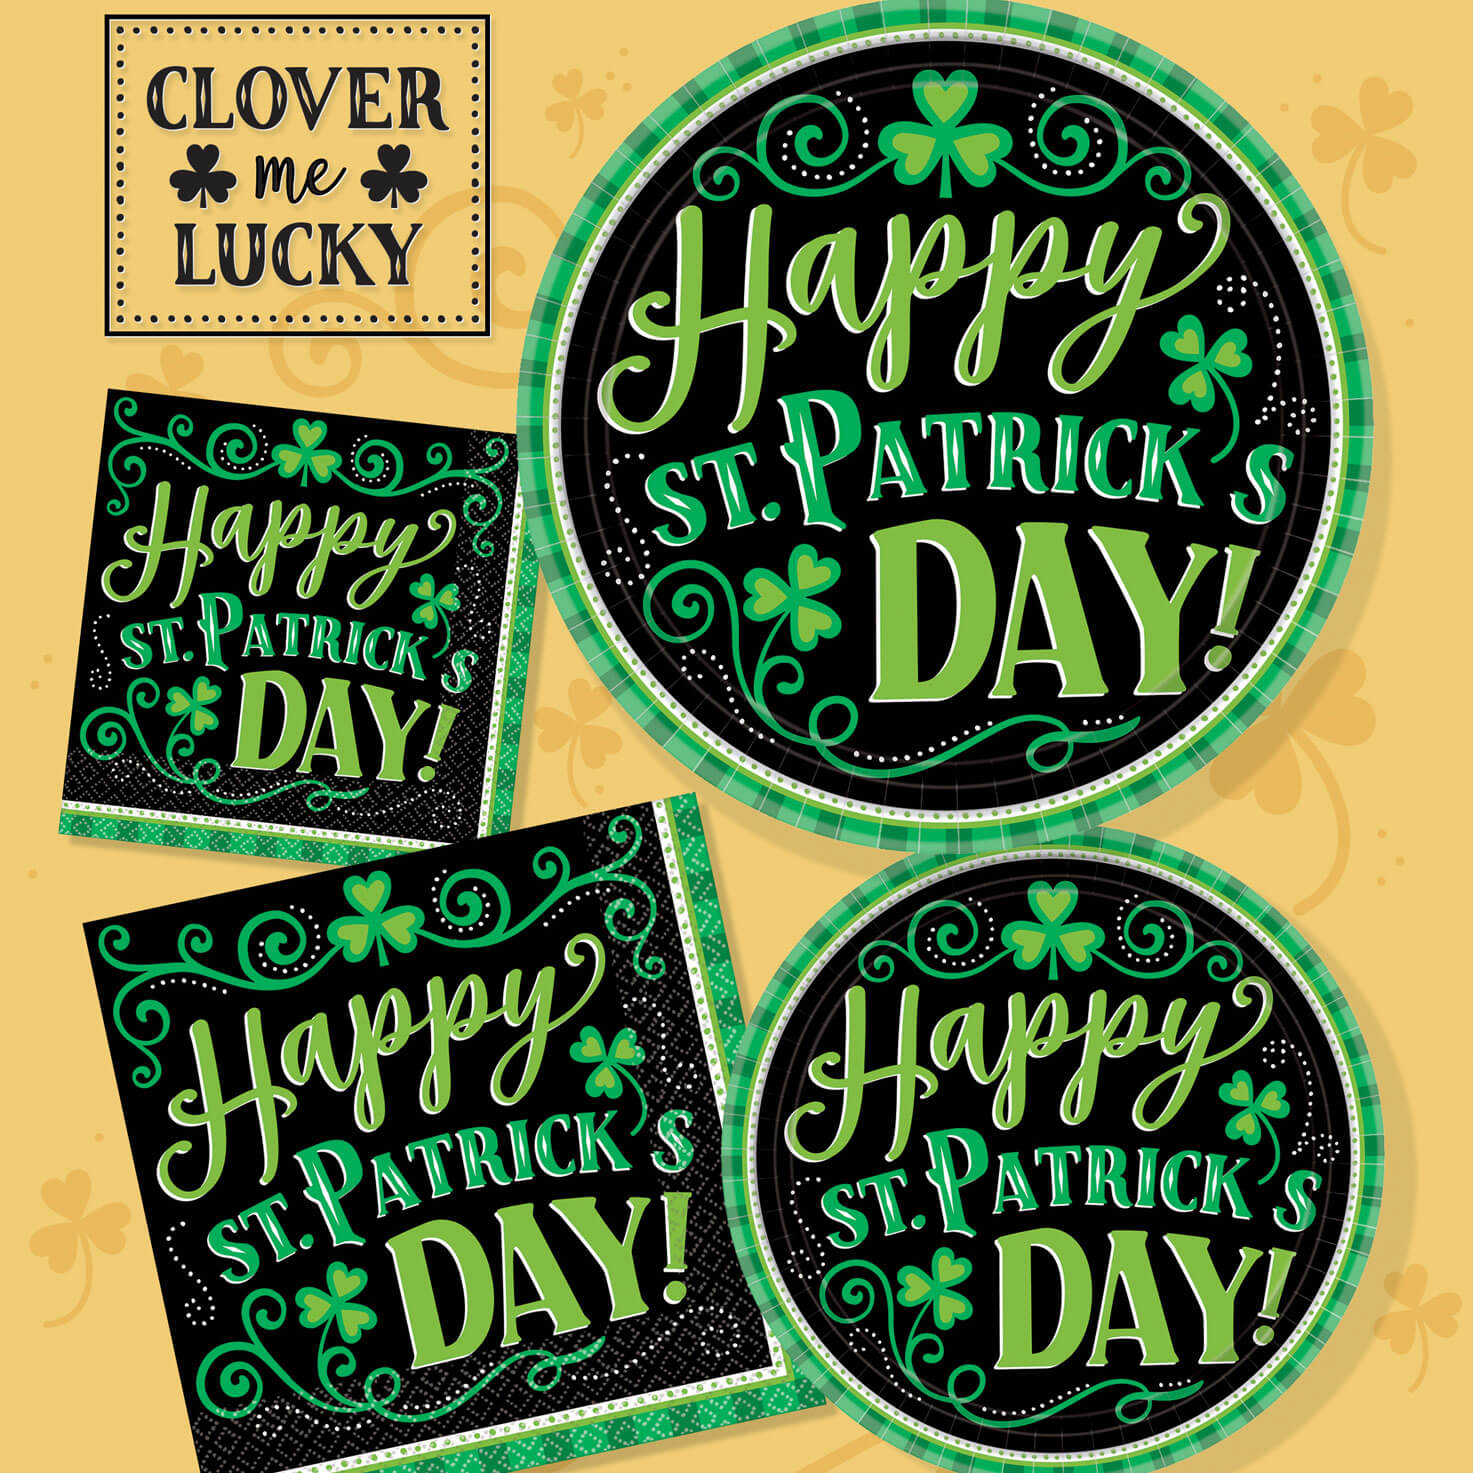 Happy St. Patrick's Day! tableware, napkins, plates, clover me lucky design